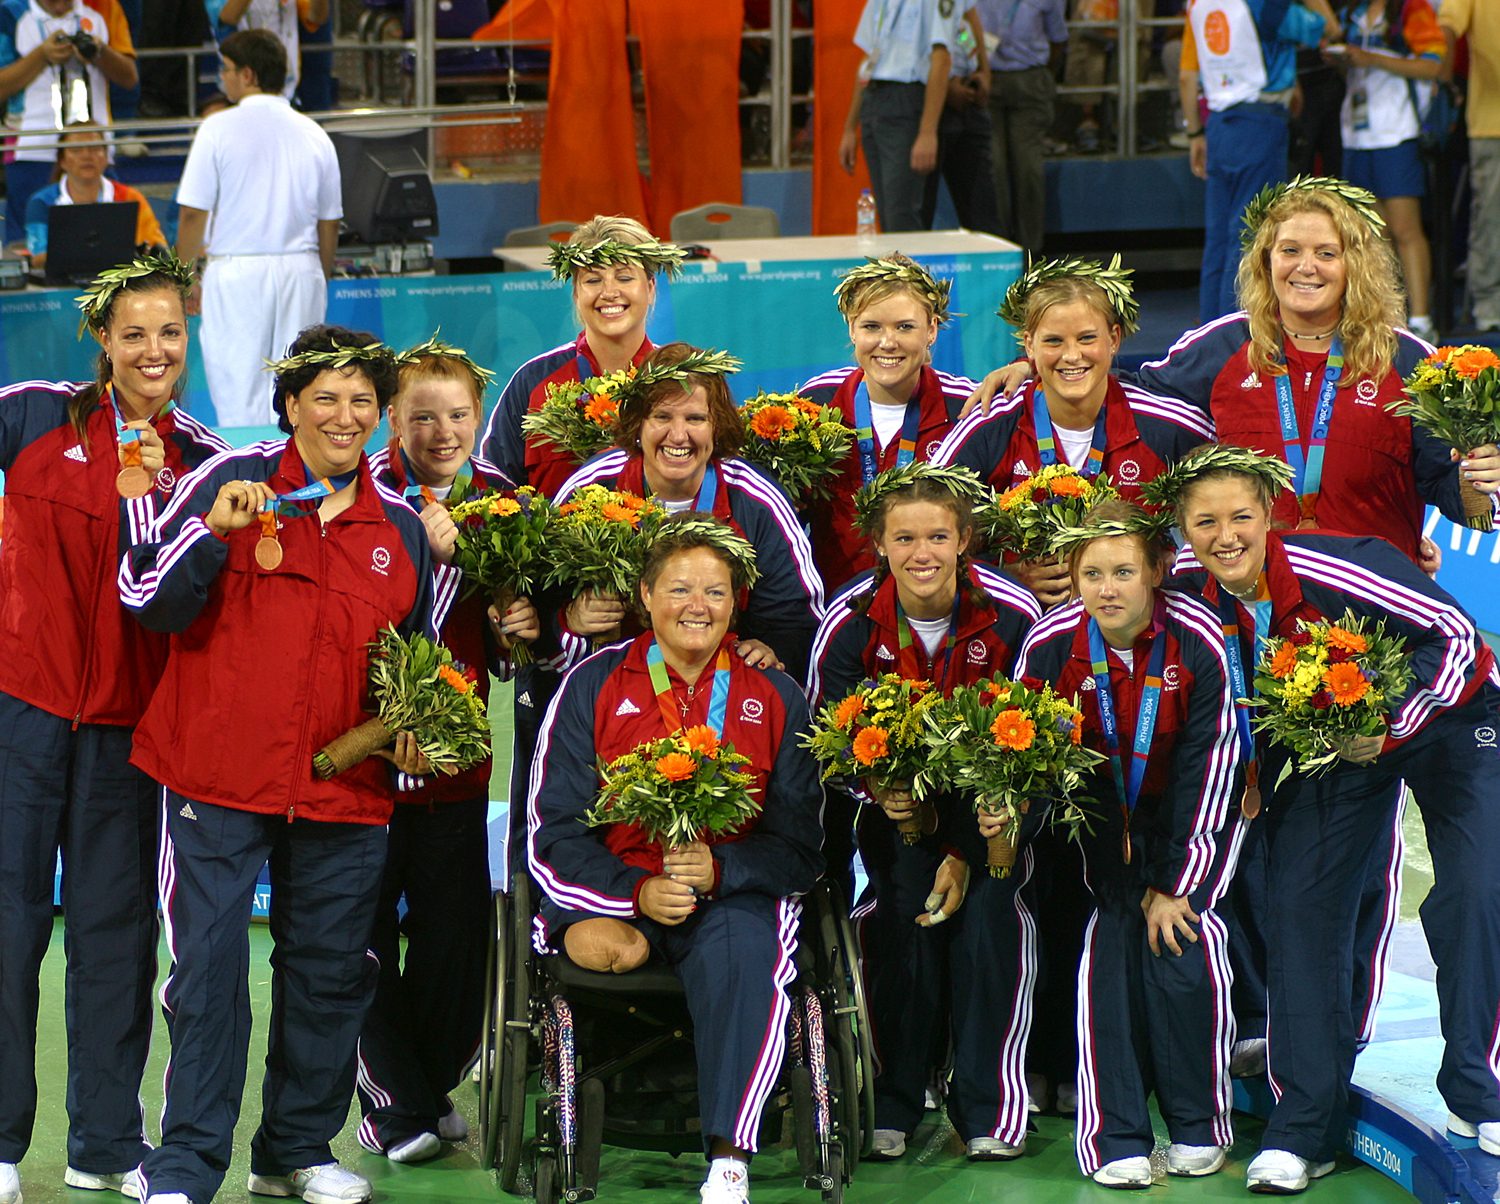 The 2004 U.S. Women's Paralympic Sitting Volleyball team members pose for a photo with their bronze medals and the American flag.